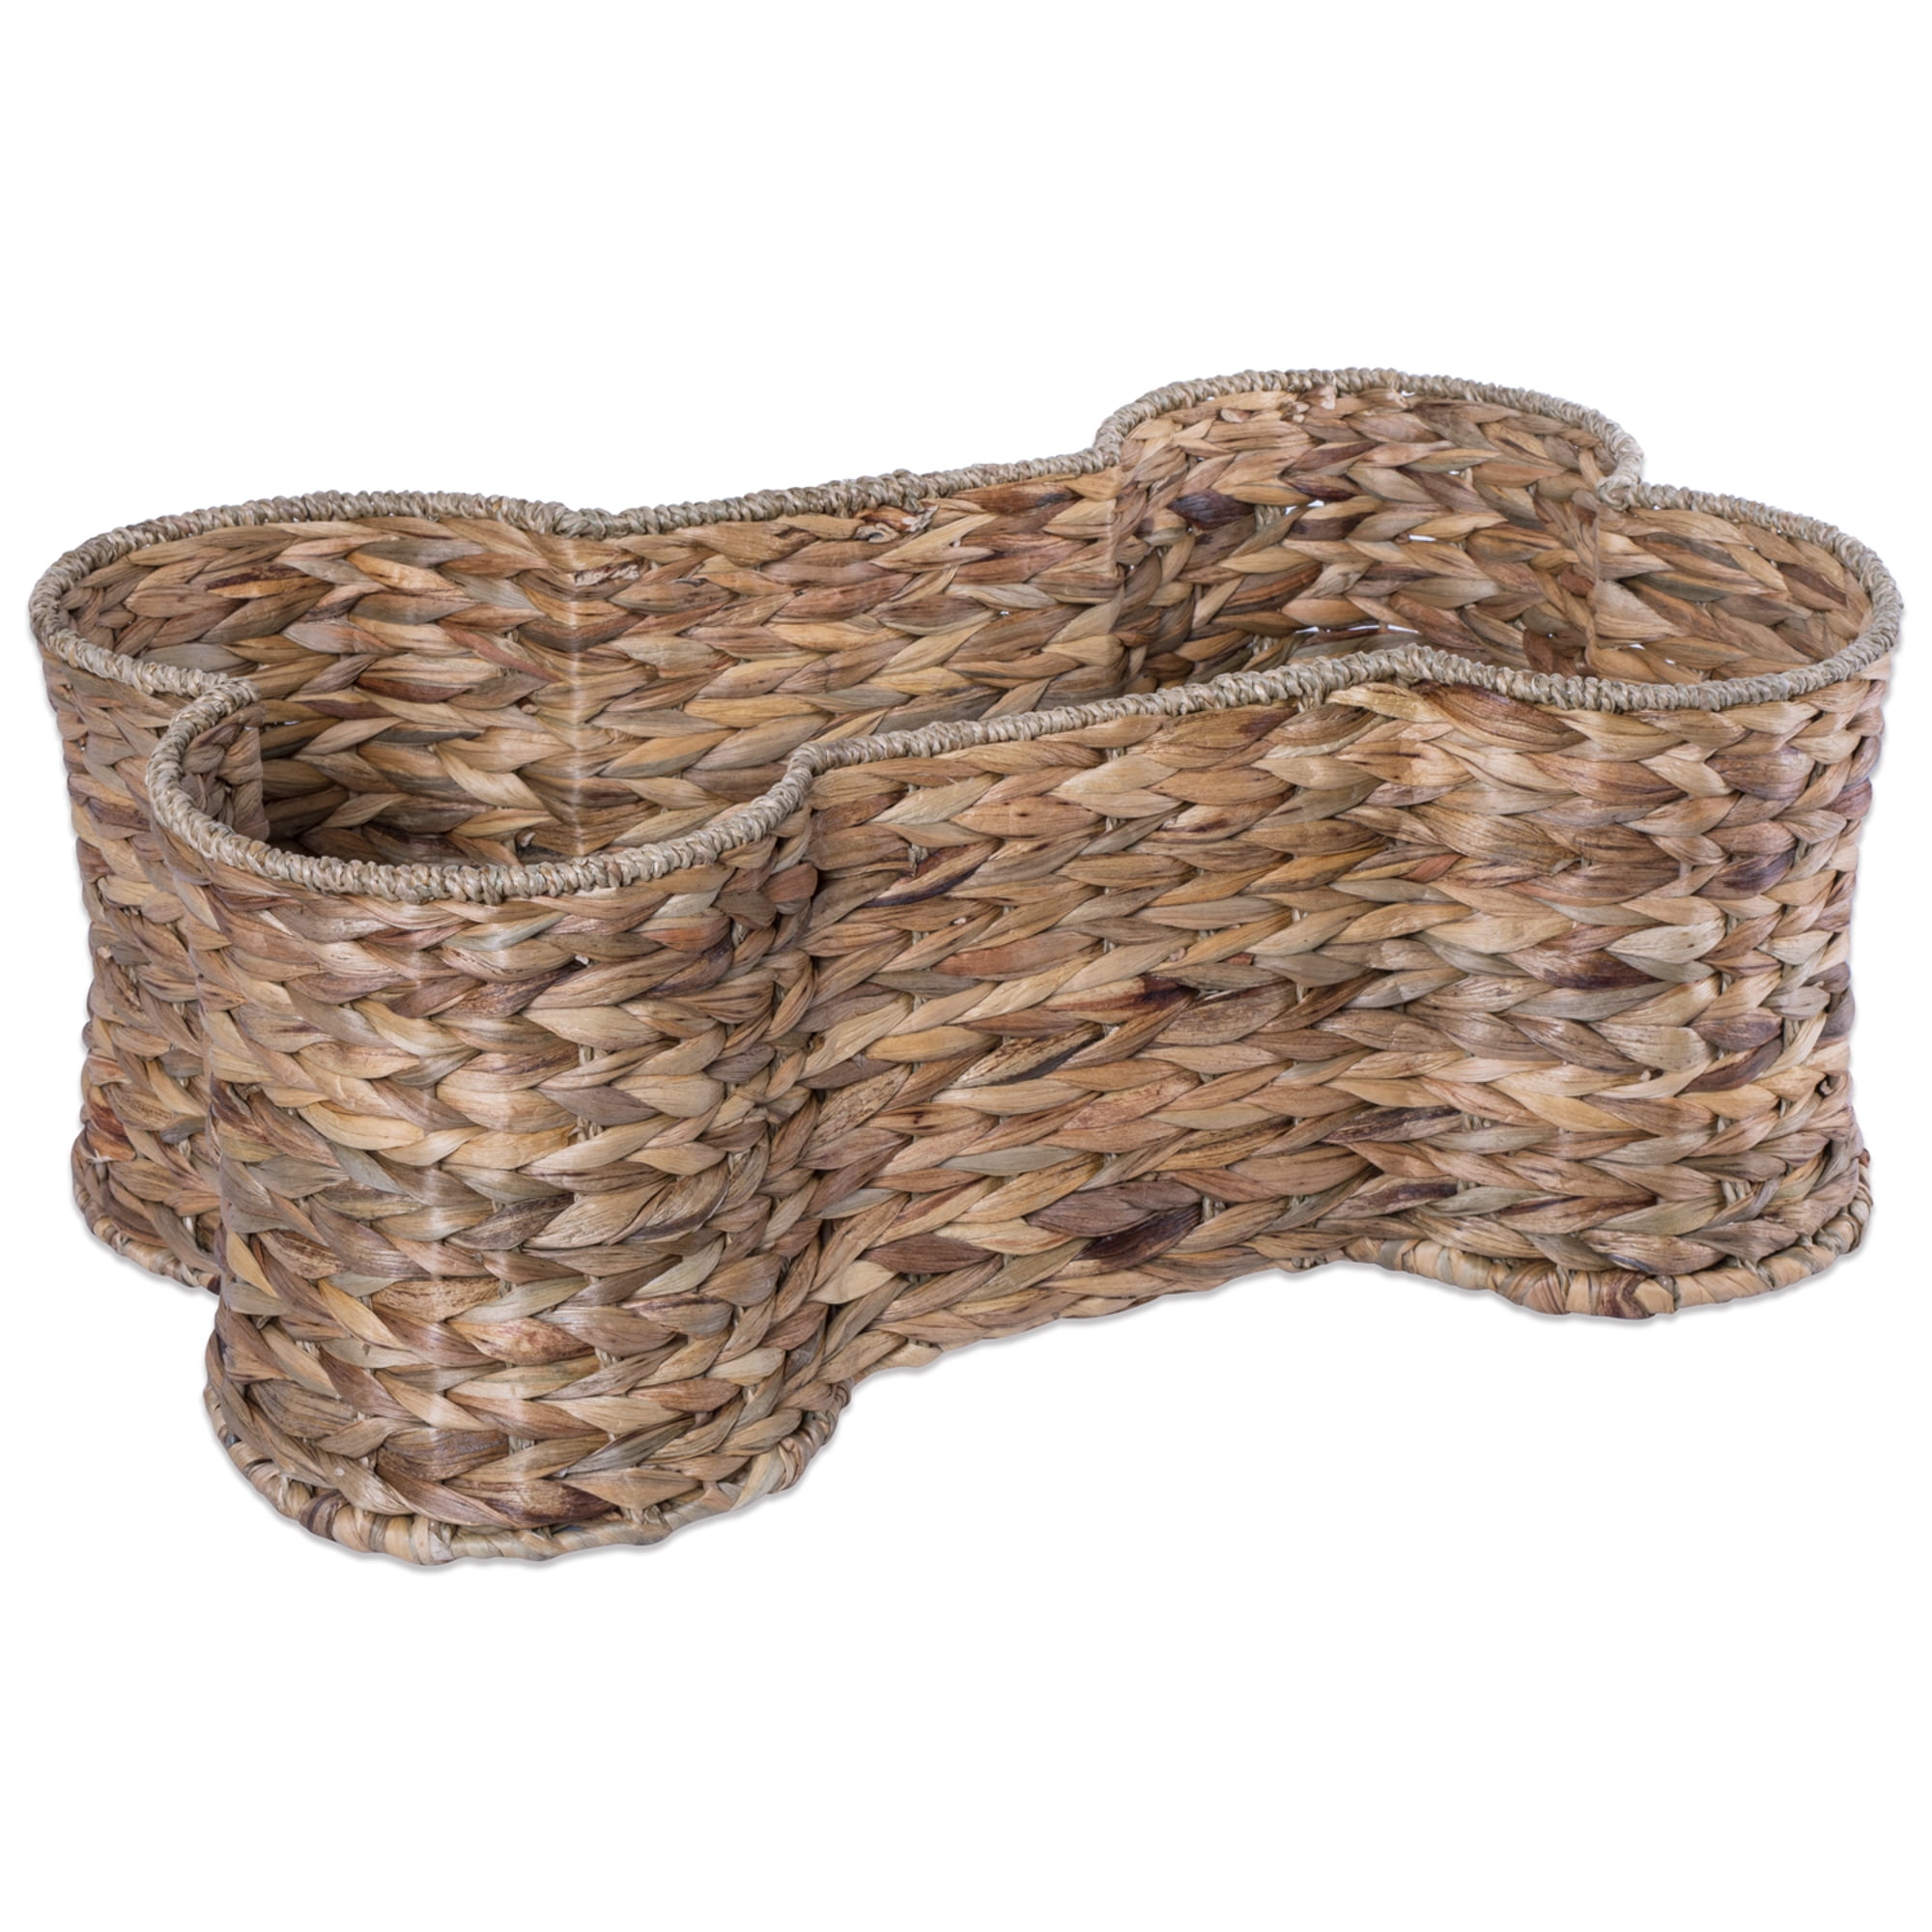 Picture of Design Imports CAMZ37311 24 x 15 x 9 in. Hyacinth Bone Pet Basket - Large